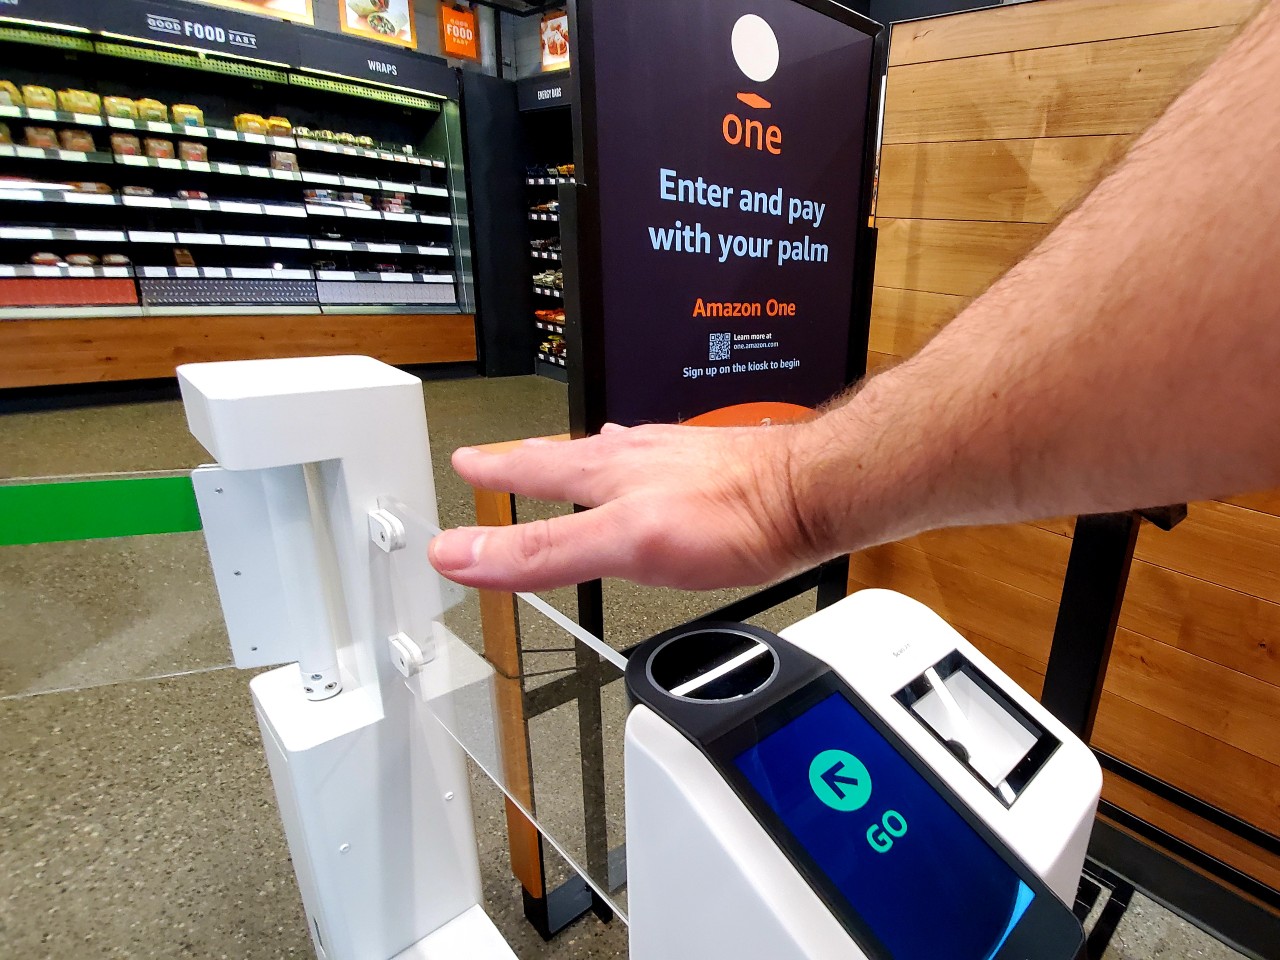 Amazon brings Push of the Palm to Whole Foods